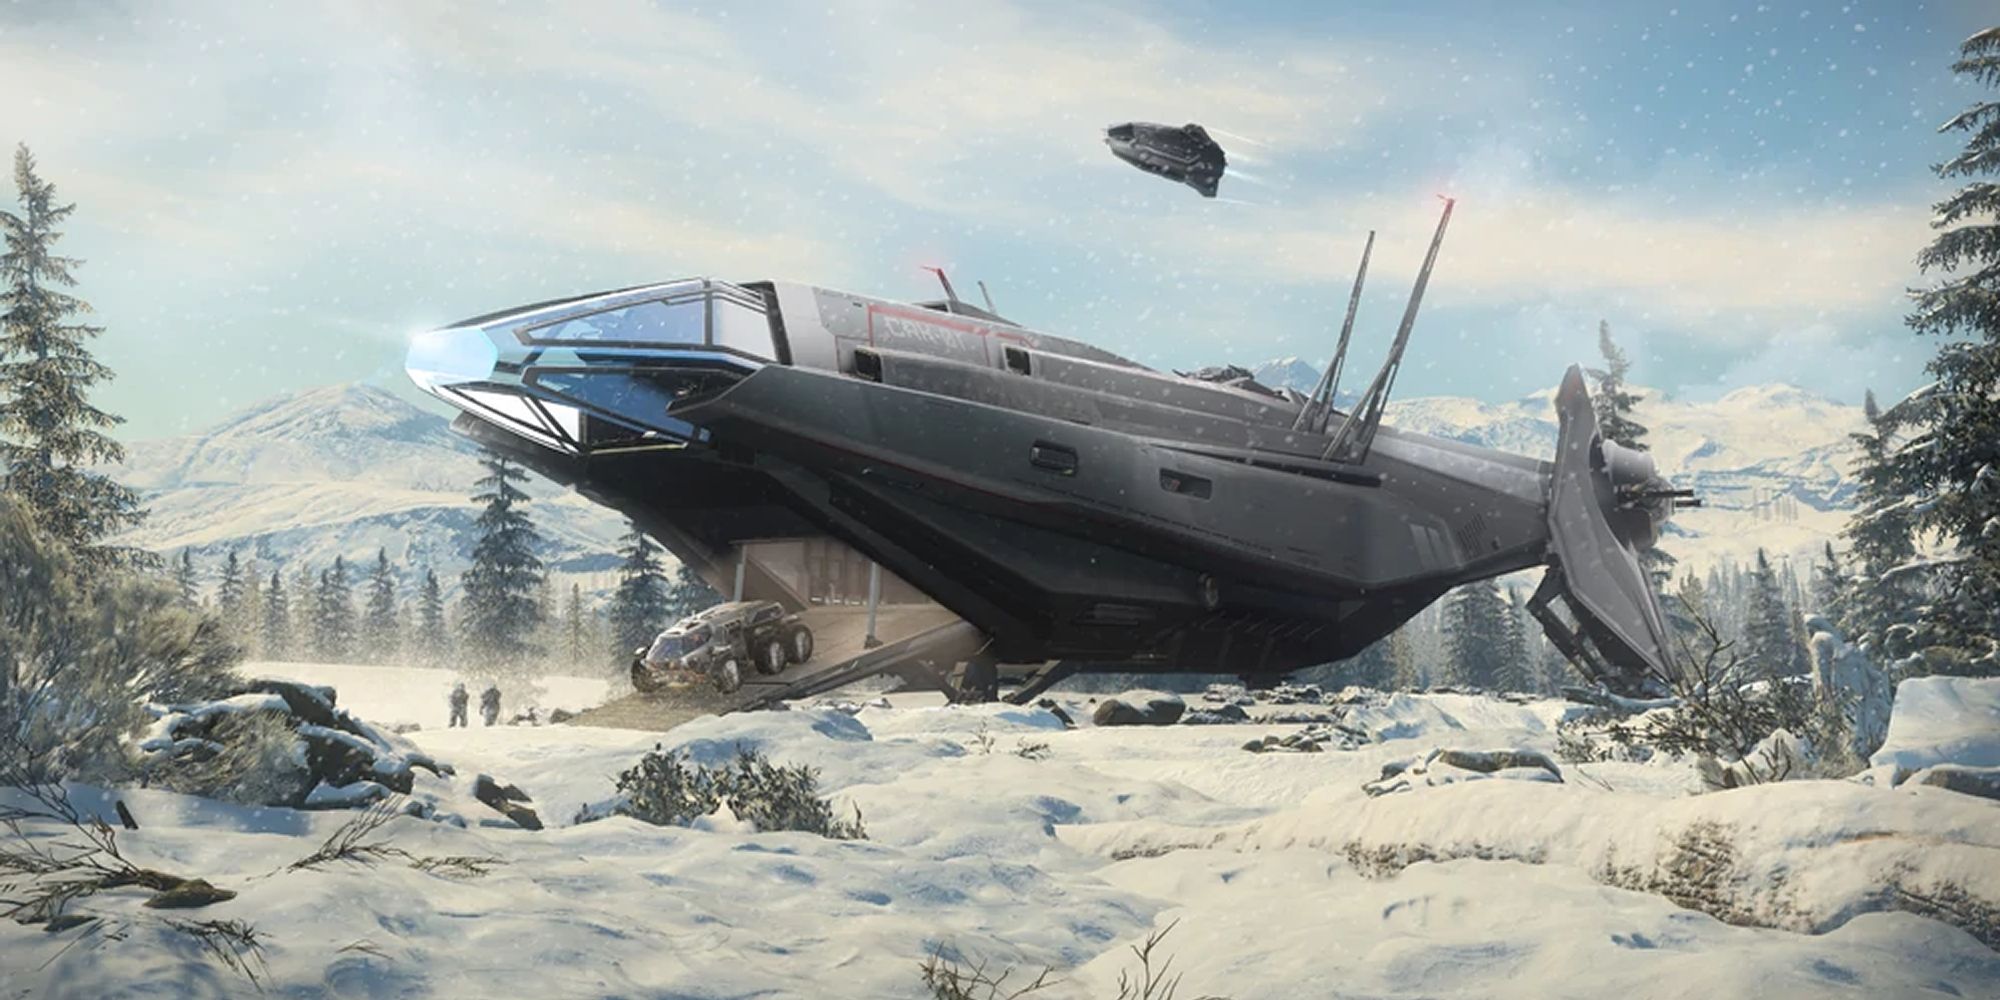 The Carrack In A Snowy Region